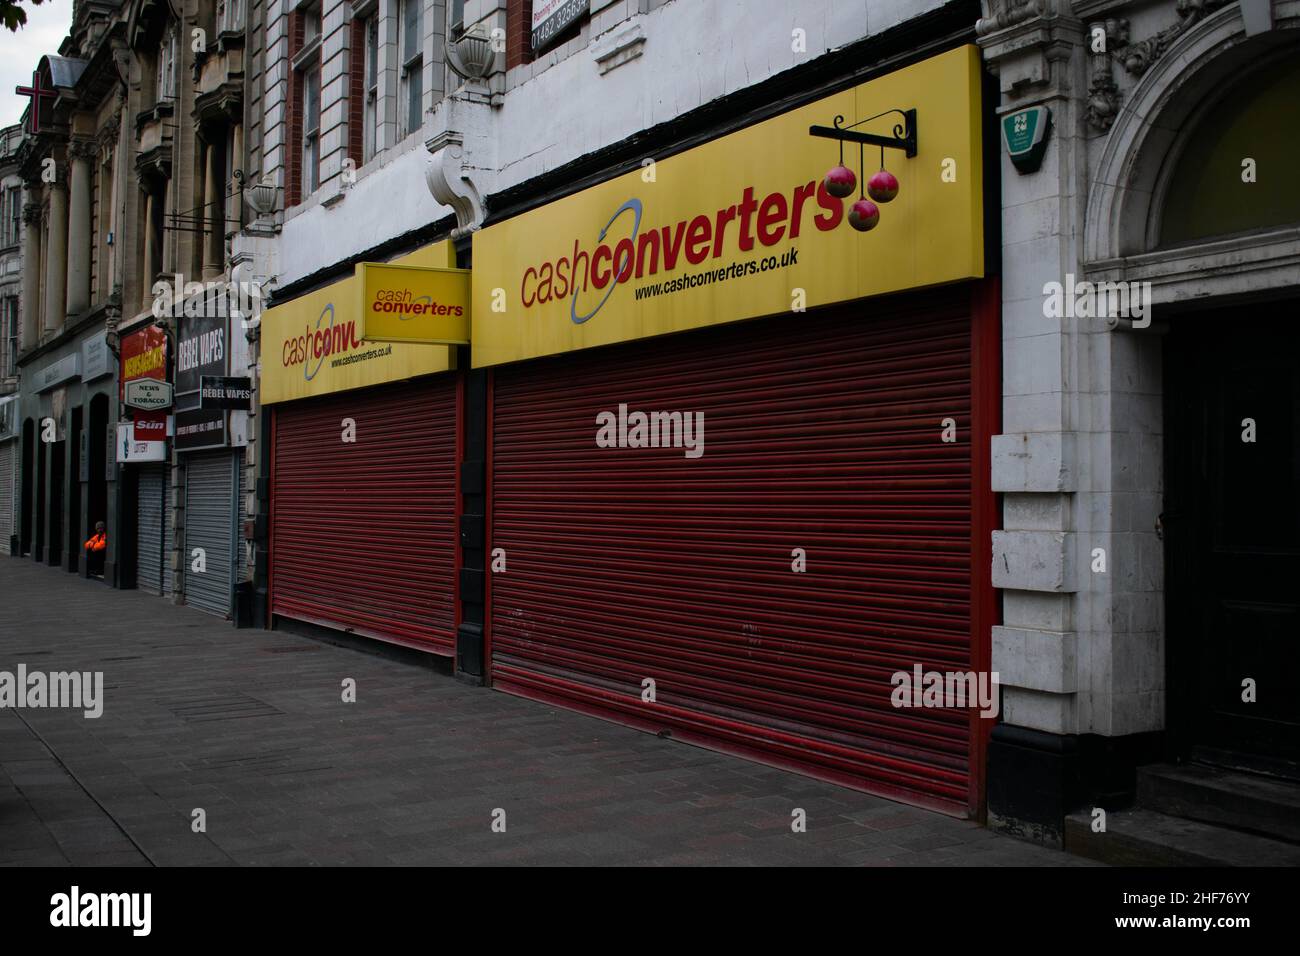 ash Converts Pawnbroker shop front. Cash Converters International Limited is an Australian retail pawnbroking company which also provides payday loans Stock Photo